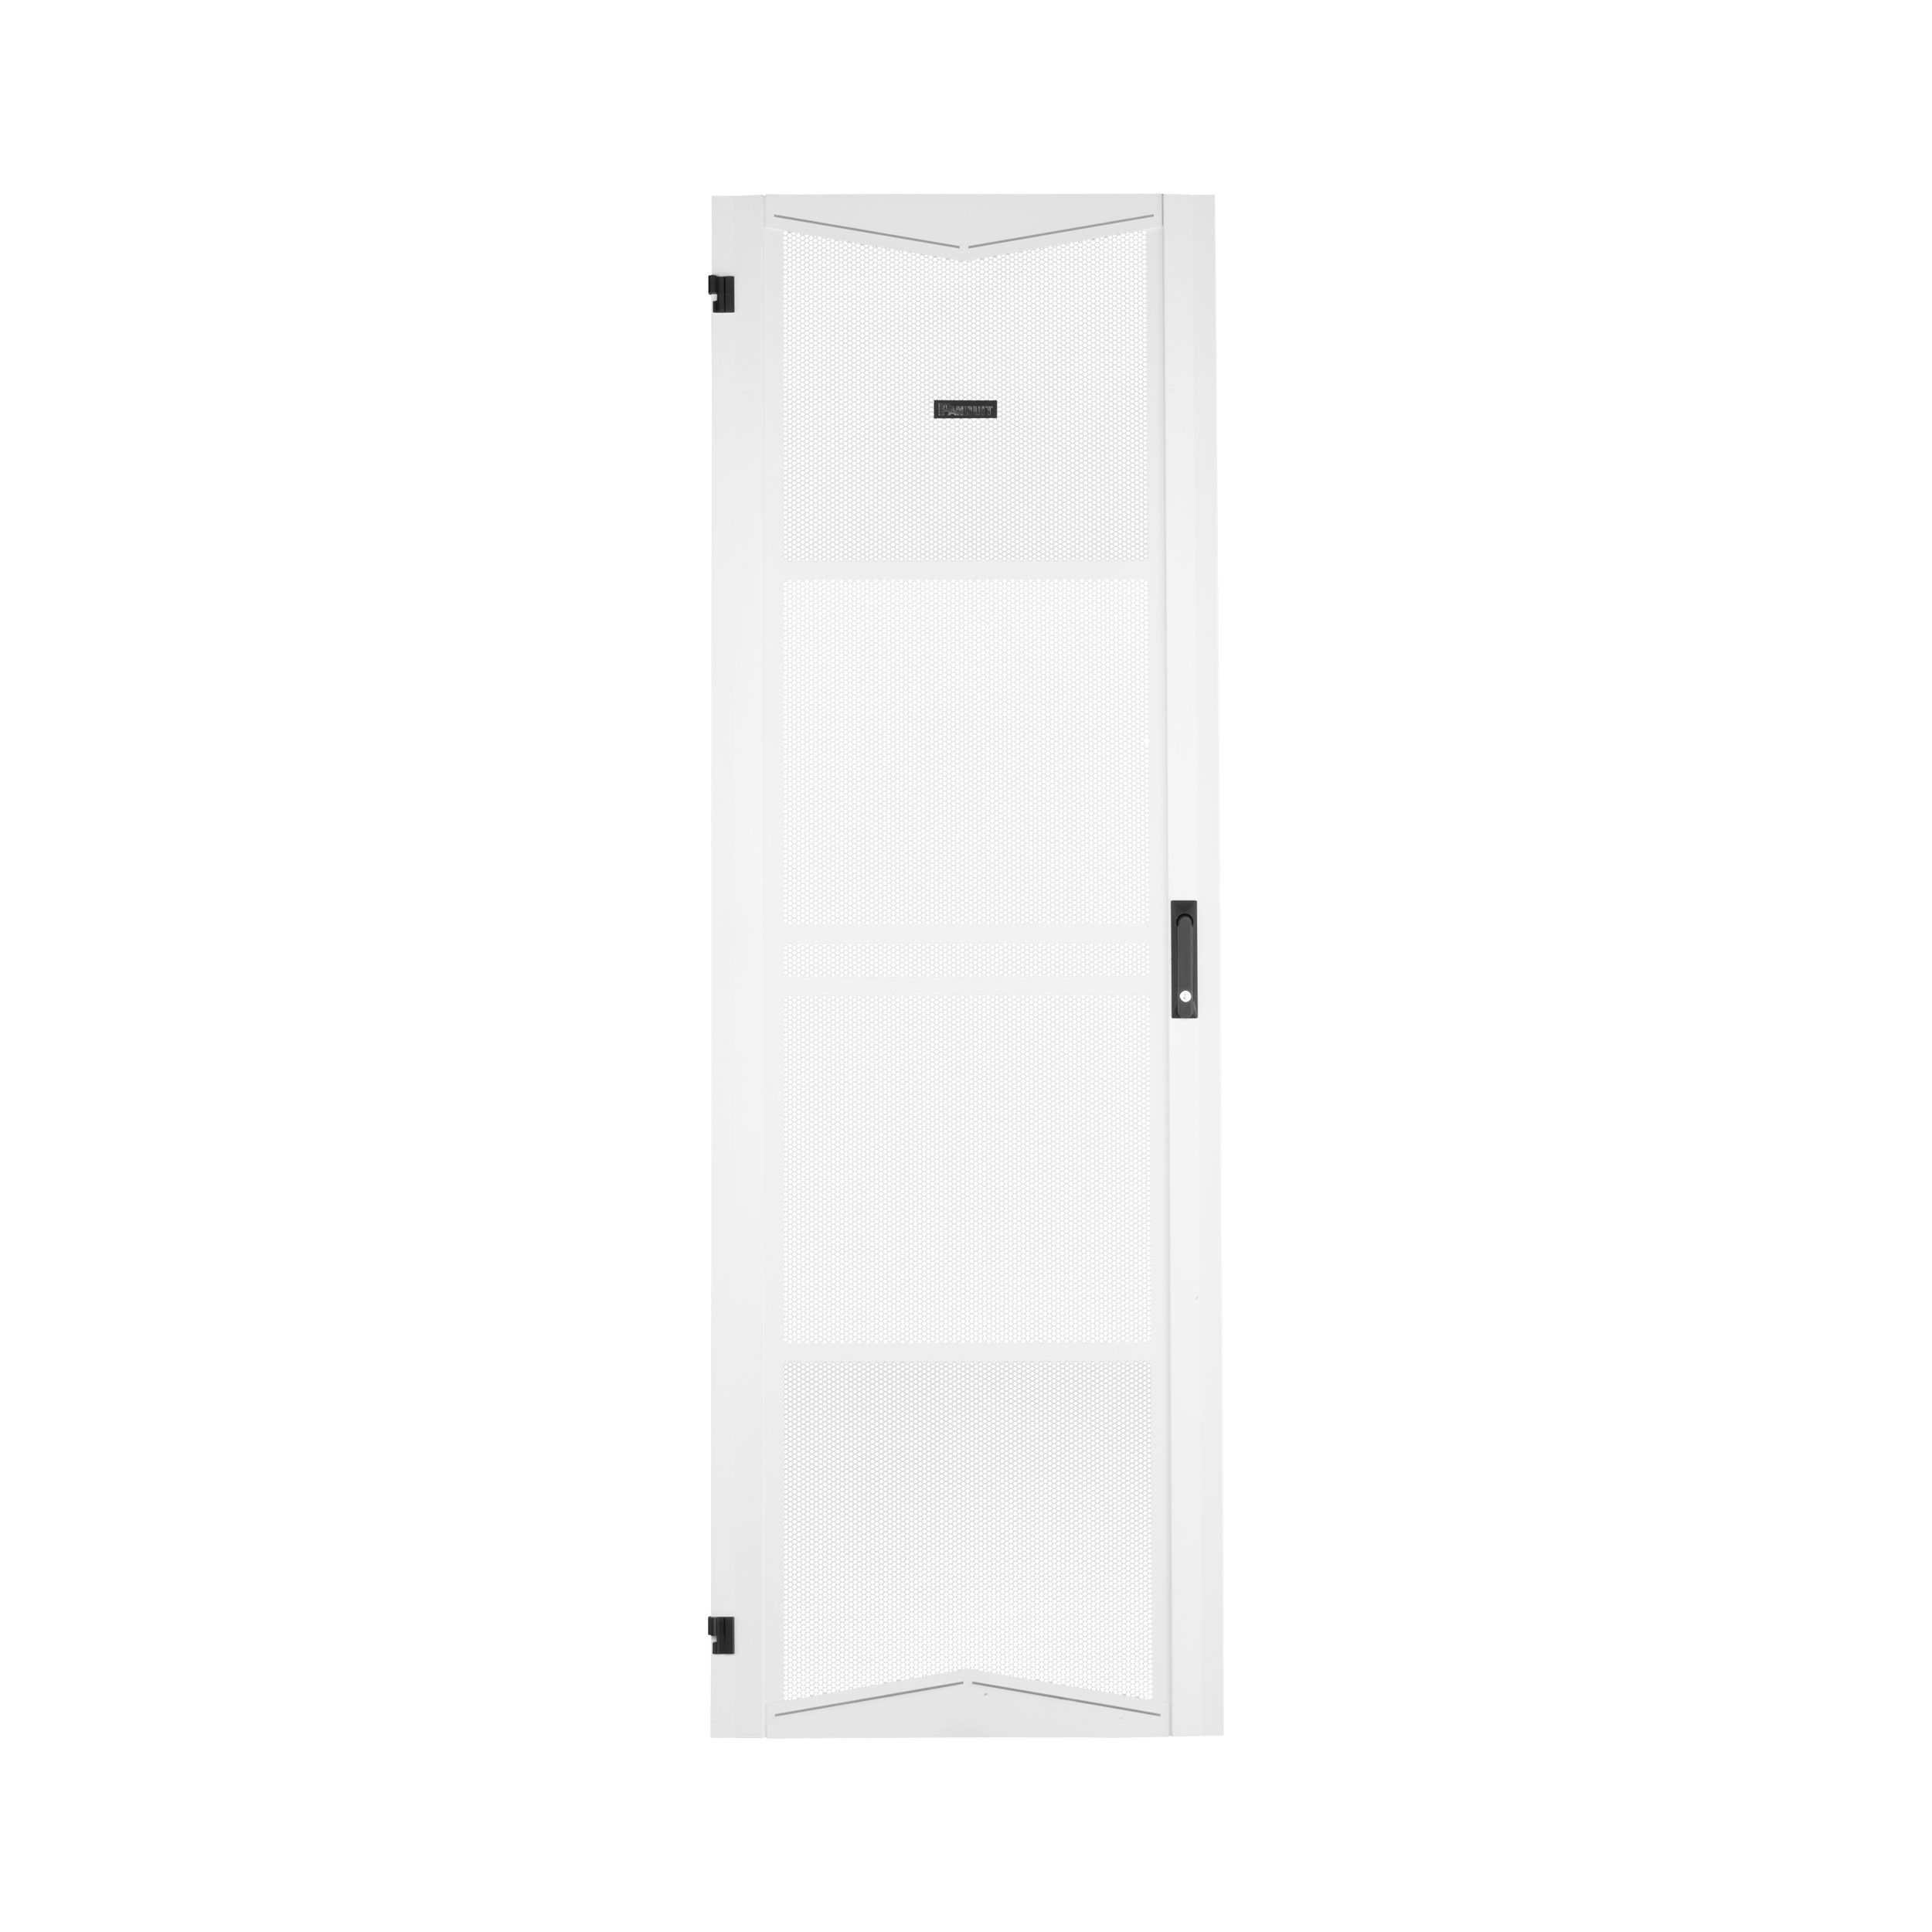 Single Hinged Door, Perforated, 600mmx42